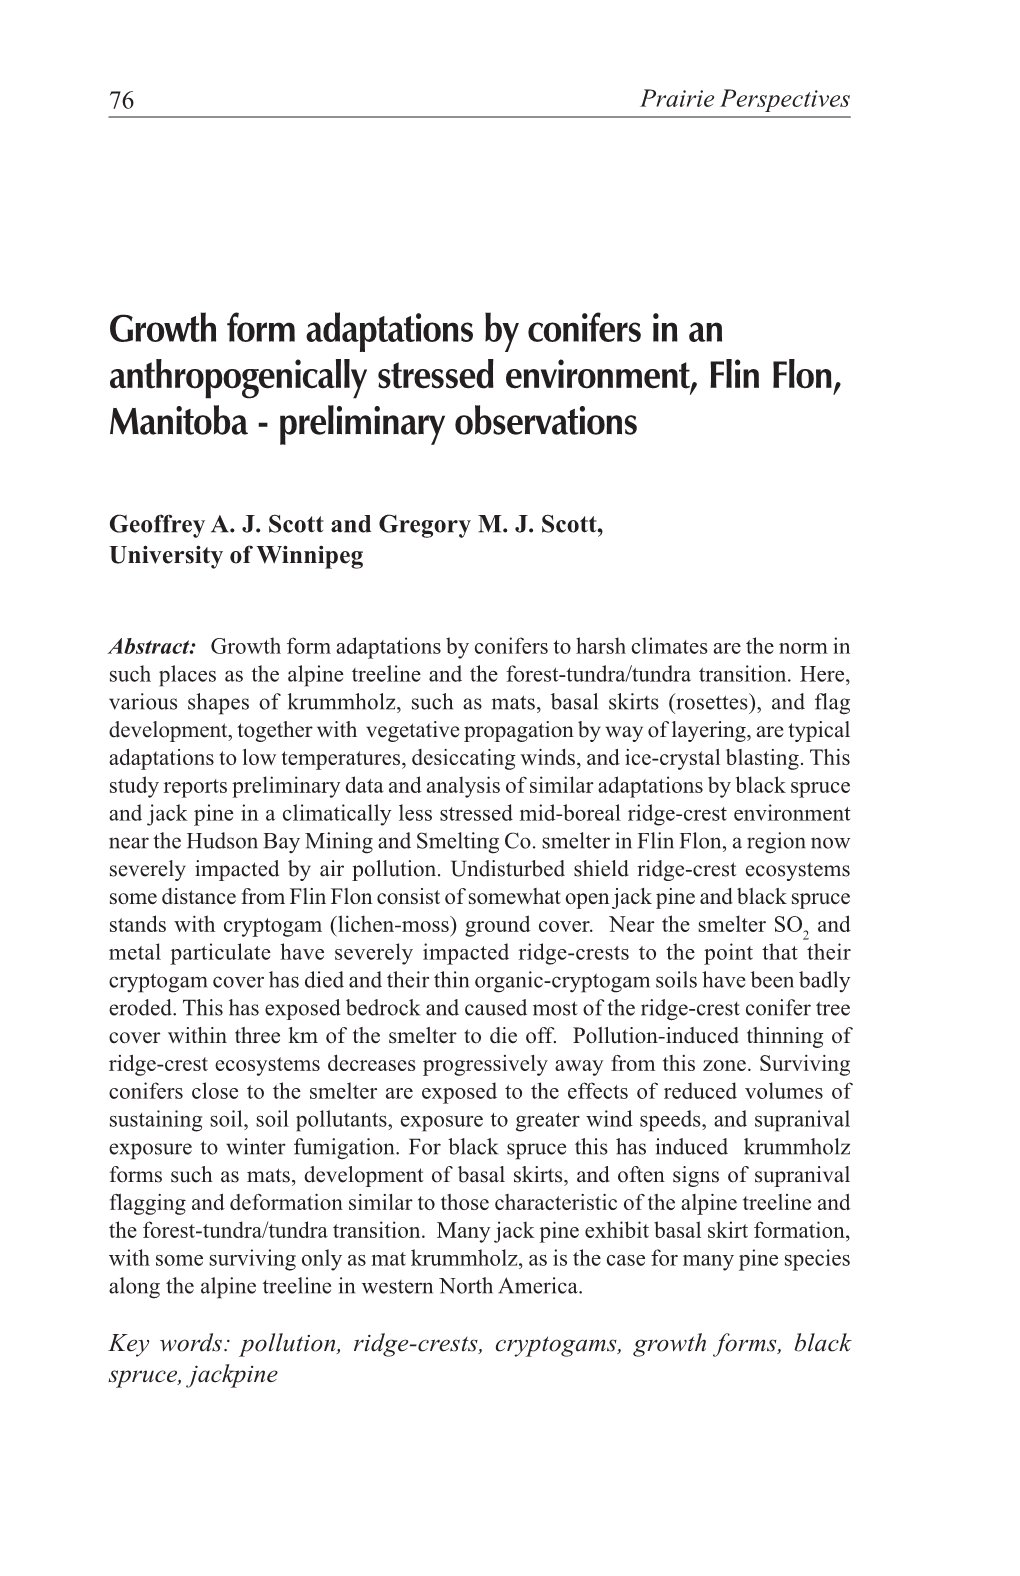 Growth Form Adaptations by Conifers in an Anthropogenically Stressed Environment, Flin Flon, Manitoba - Preliminary Observations